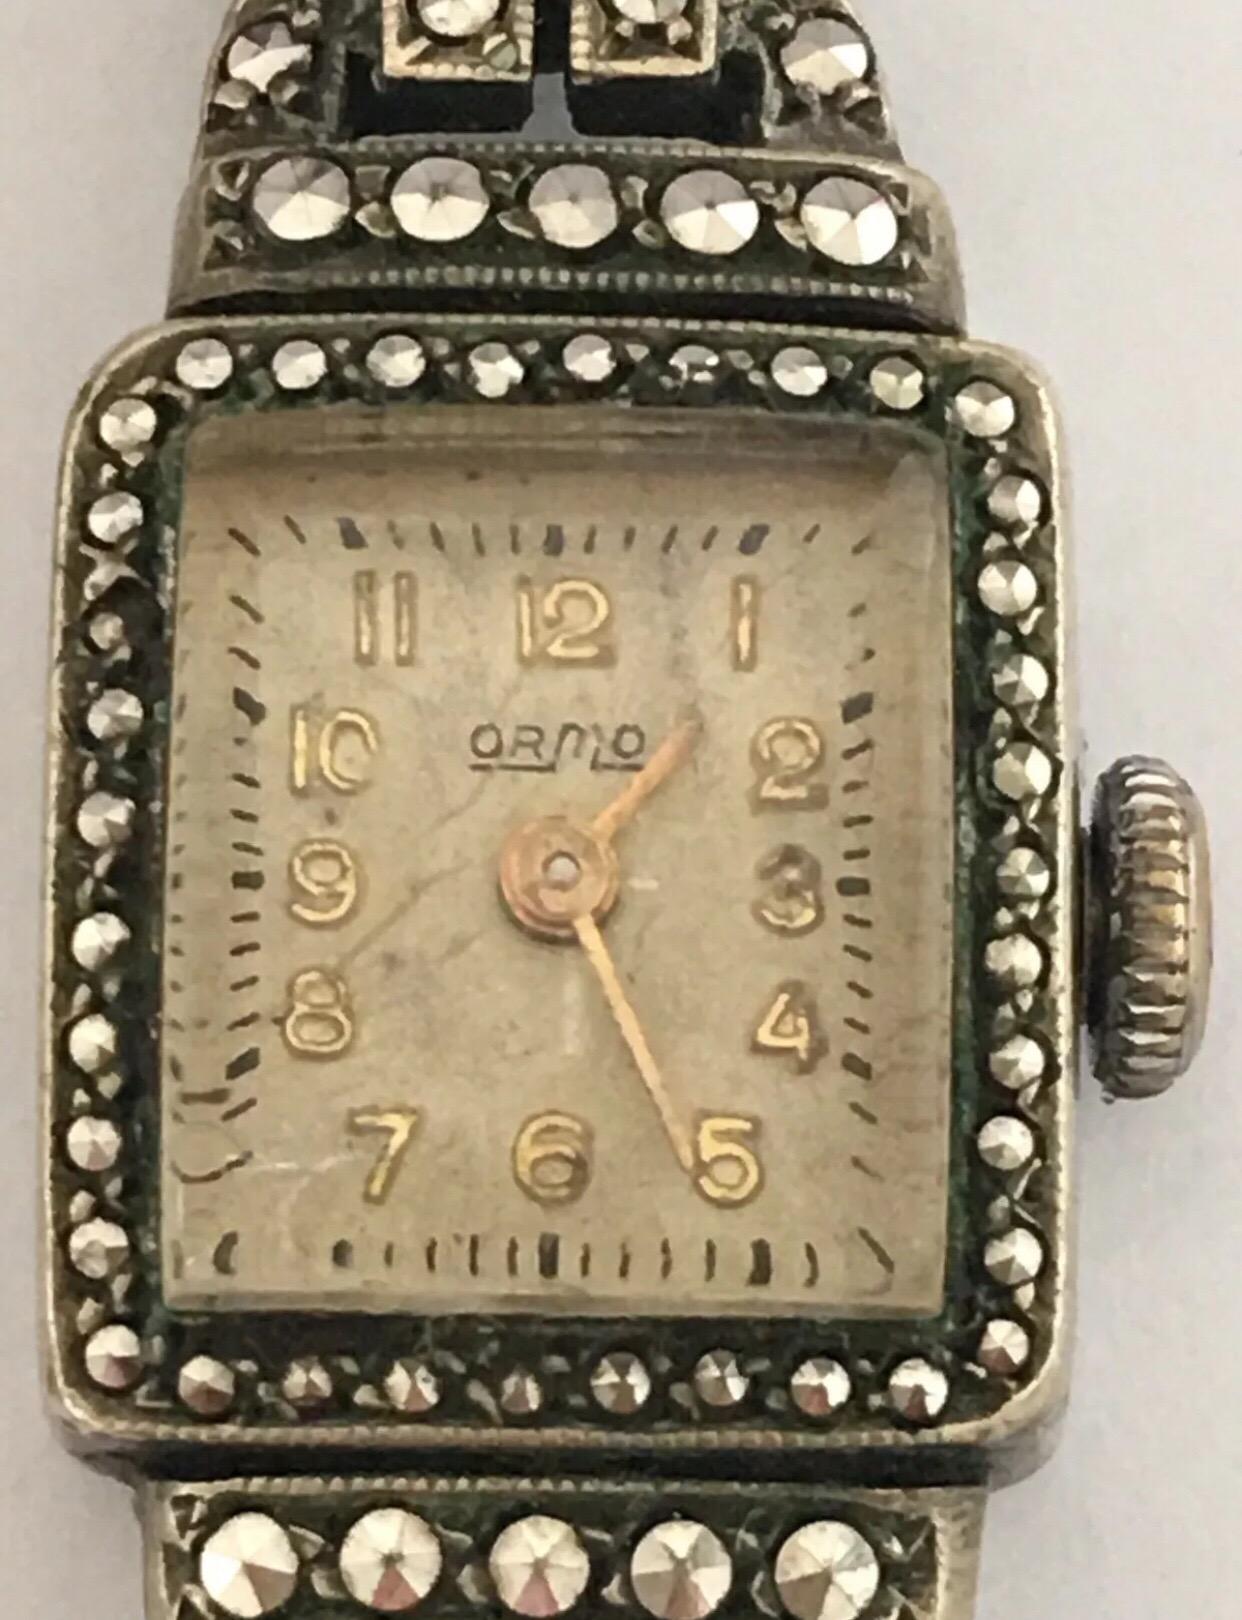 Vintage 1940’s Stainless Steel Marcaseed Ladies Cocktail Watch. This mechanical watch is working and running well.

Please study the photos carefully as form part of the description.